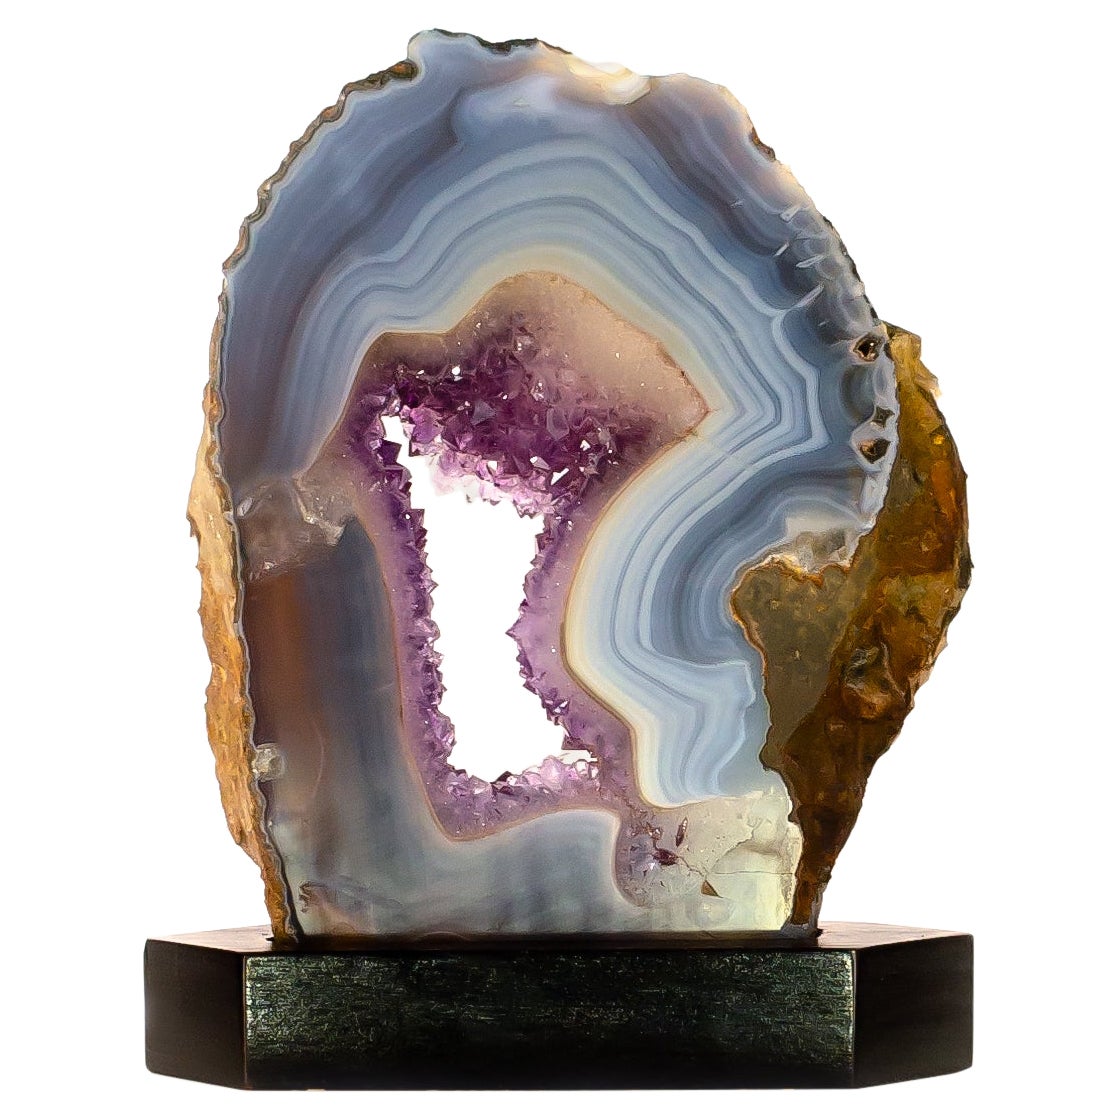 Amethyst Slice with Blue Polished Agate, Amethyst Crystals and White Quartz